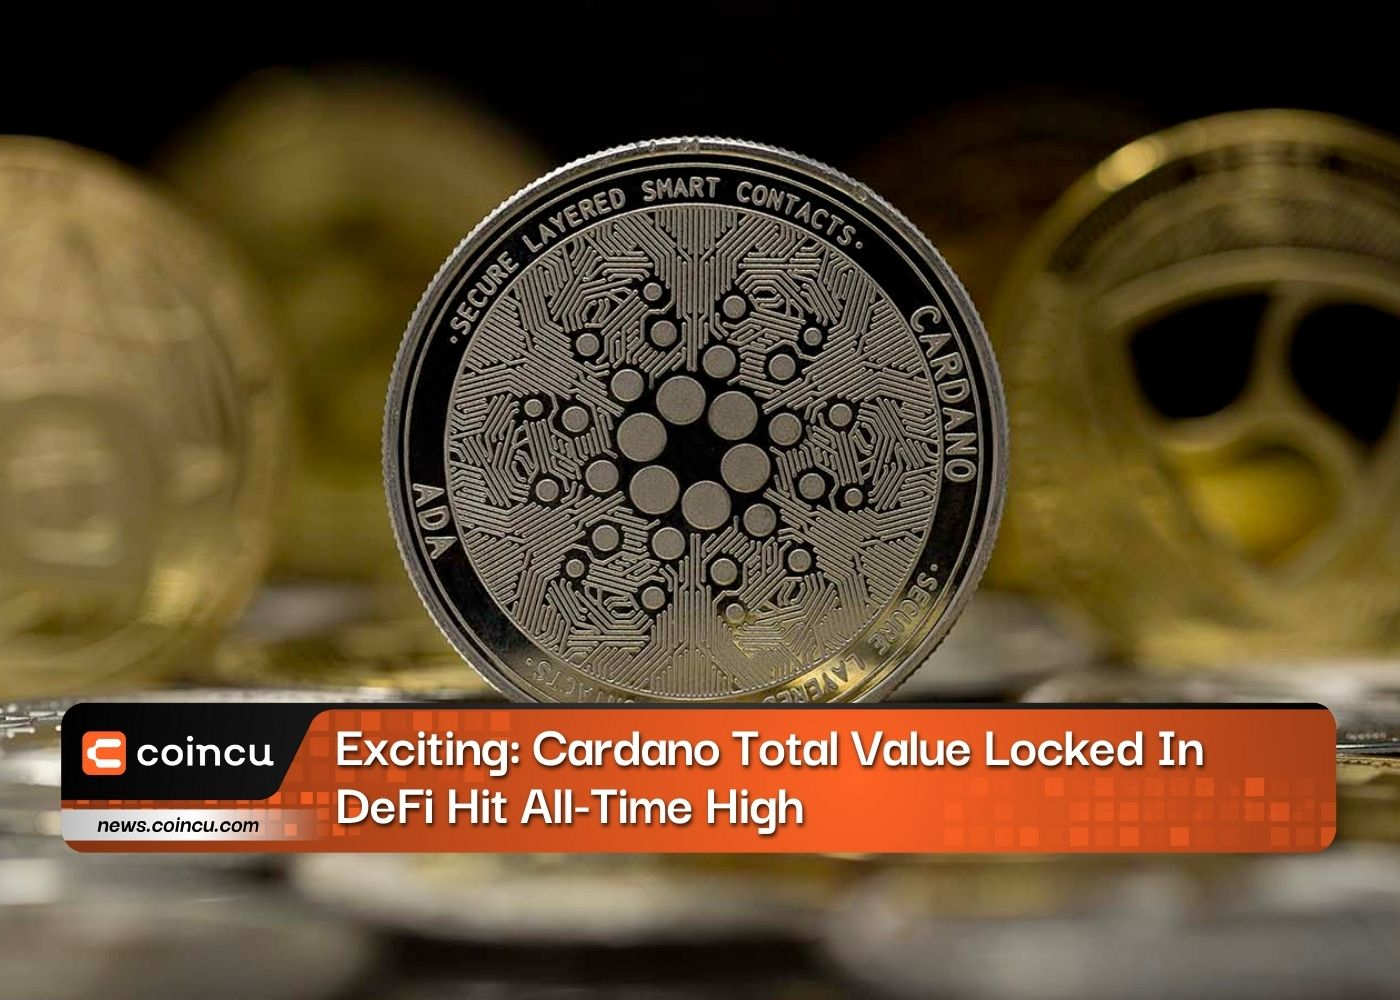 Exciting: Cardano Total Value Locked In DeFi Hit All-Time High